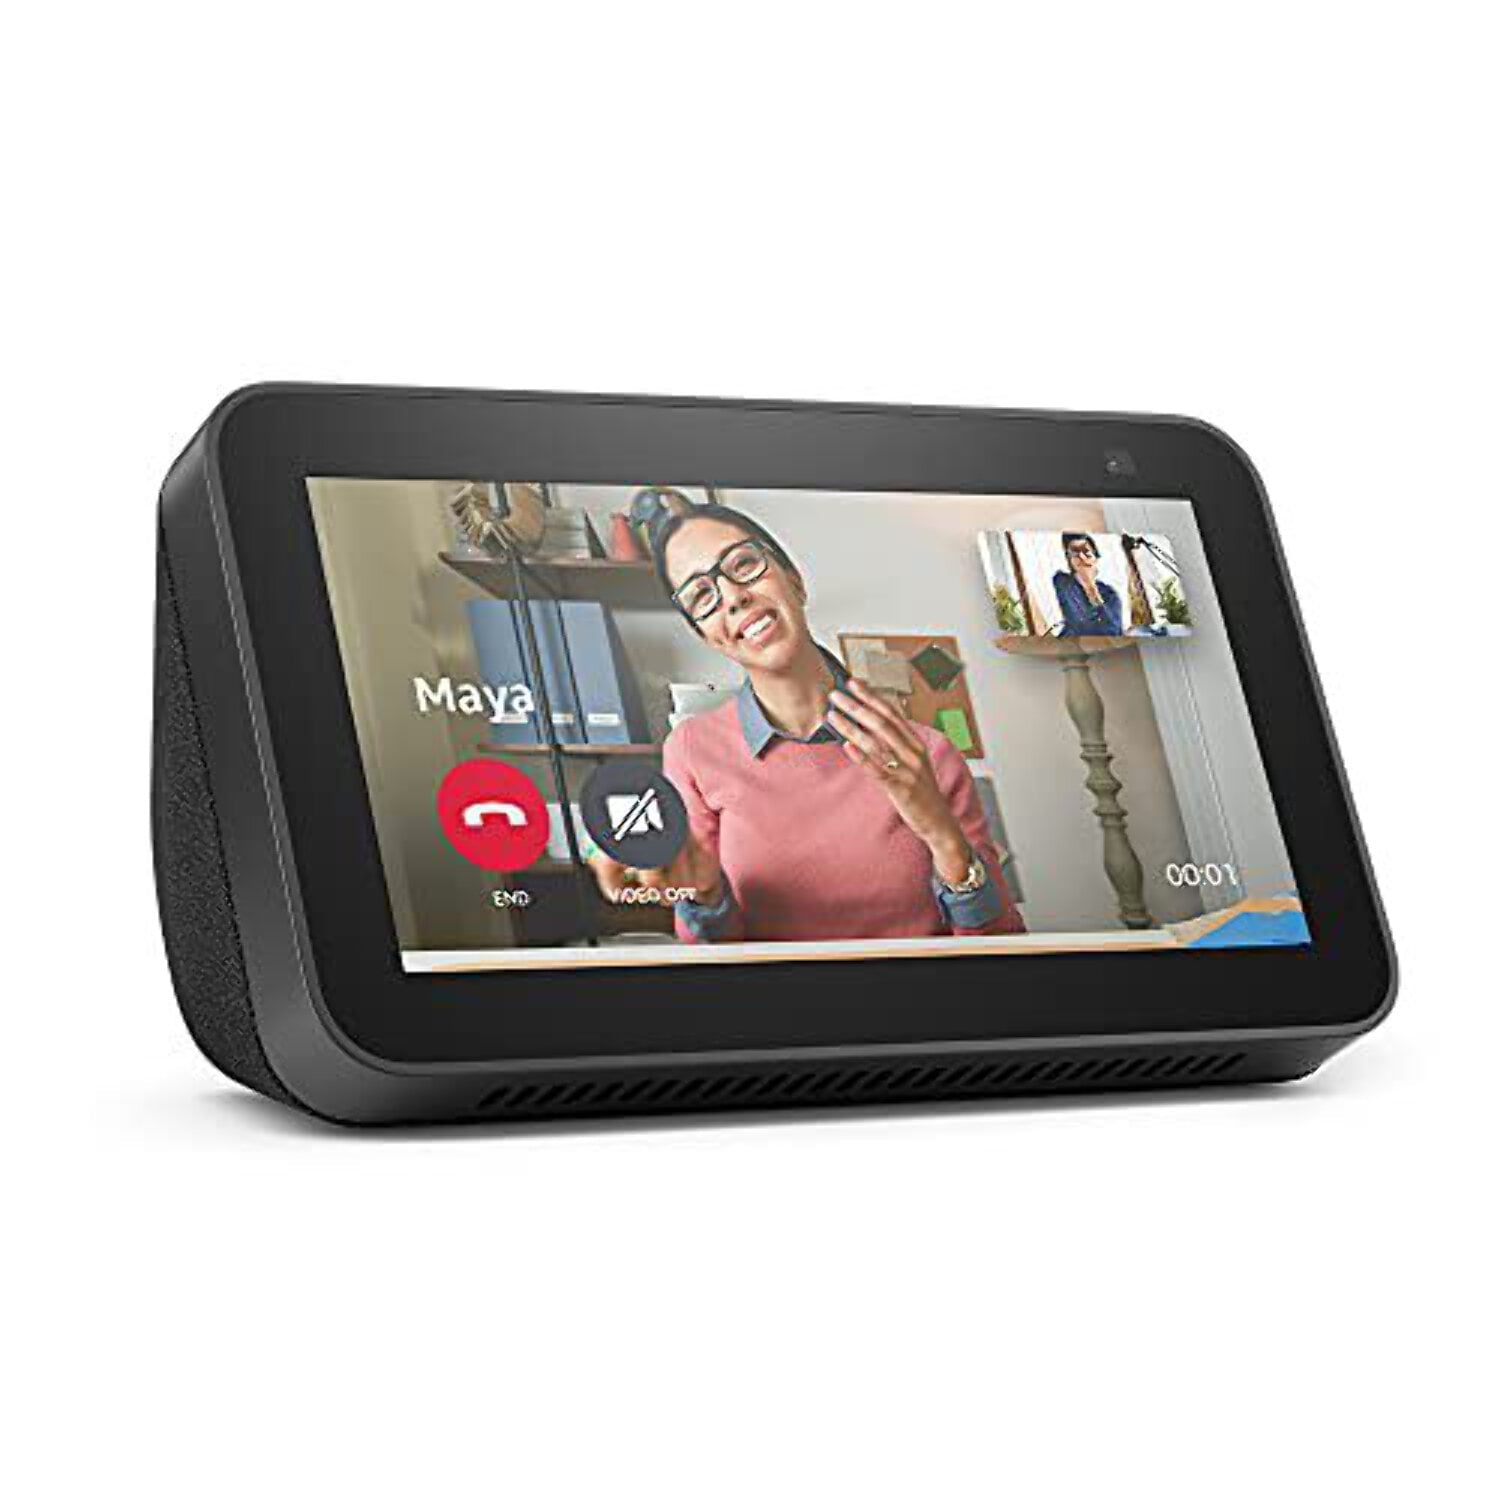 All-New Echo Show 5 (2nd Gen) | Smart Display With Alexa and 2 MP Camera | Charcoal OPEN BOX